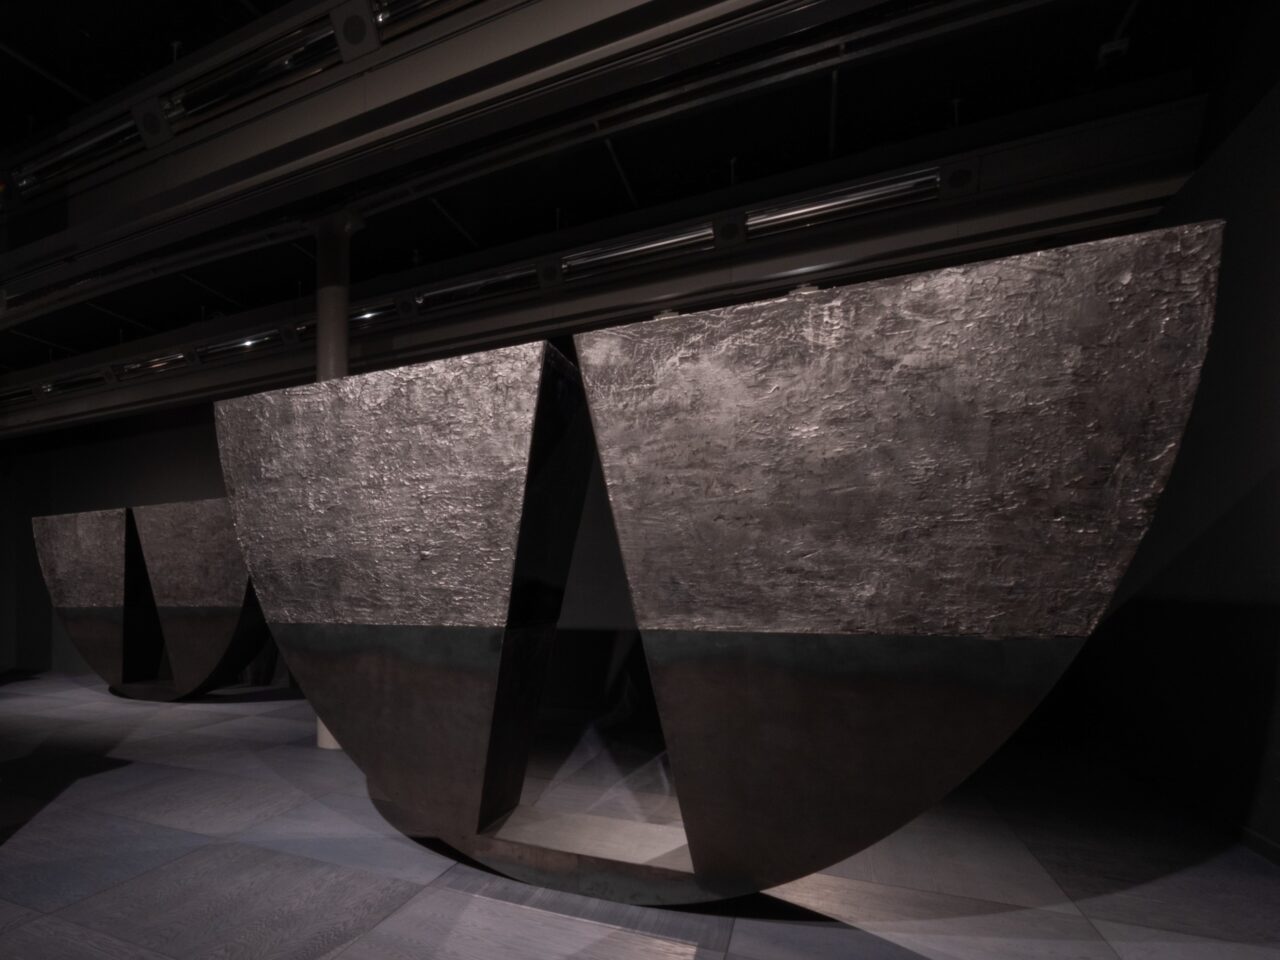 Monumental, curved, grey sculptures in a dark gallery space